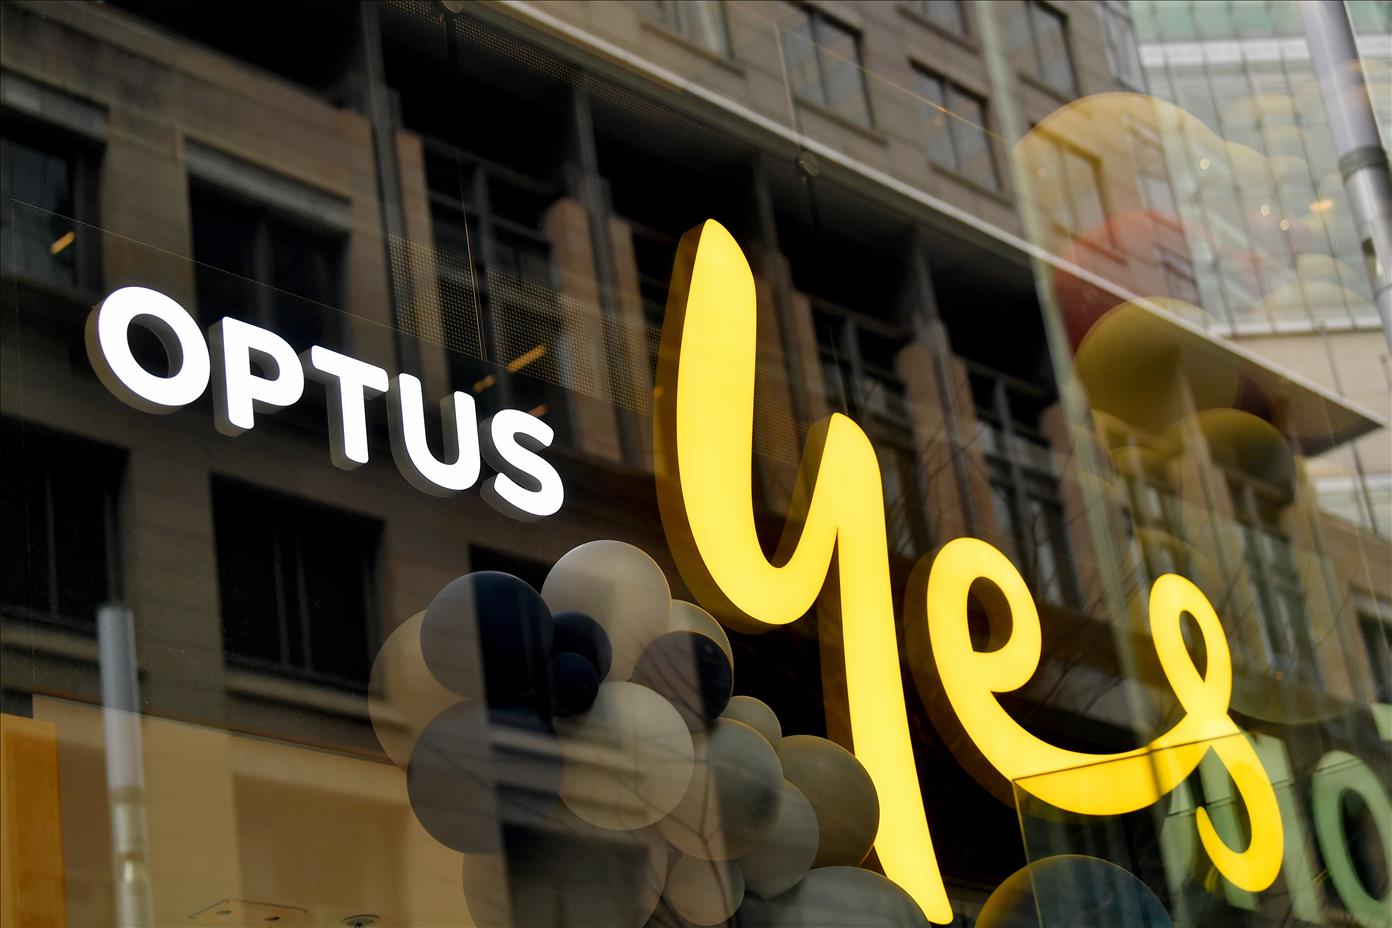 What Does The Optus Data Breach Mean For You And How Can You Protect Yourself? A Step-By-Step Guide